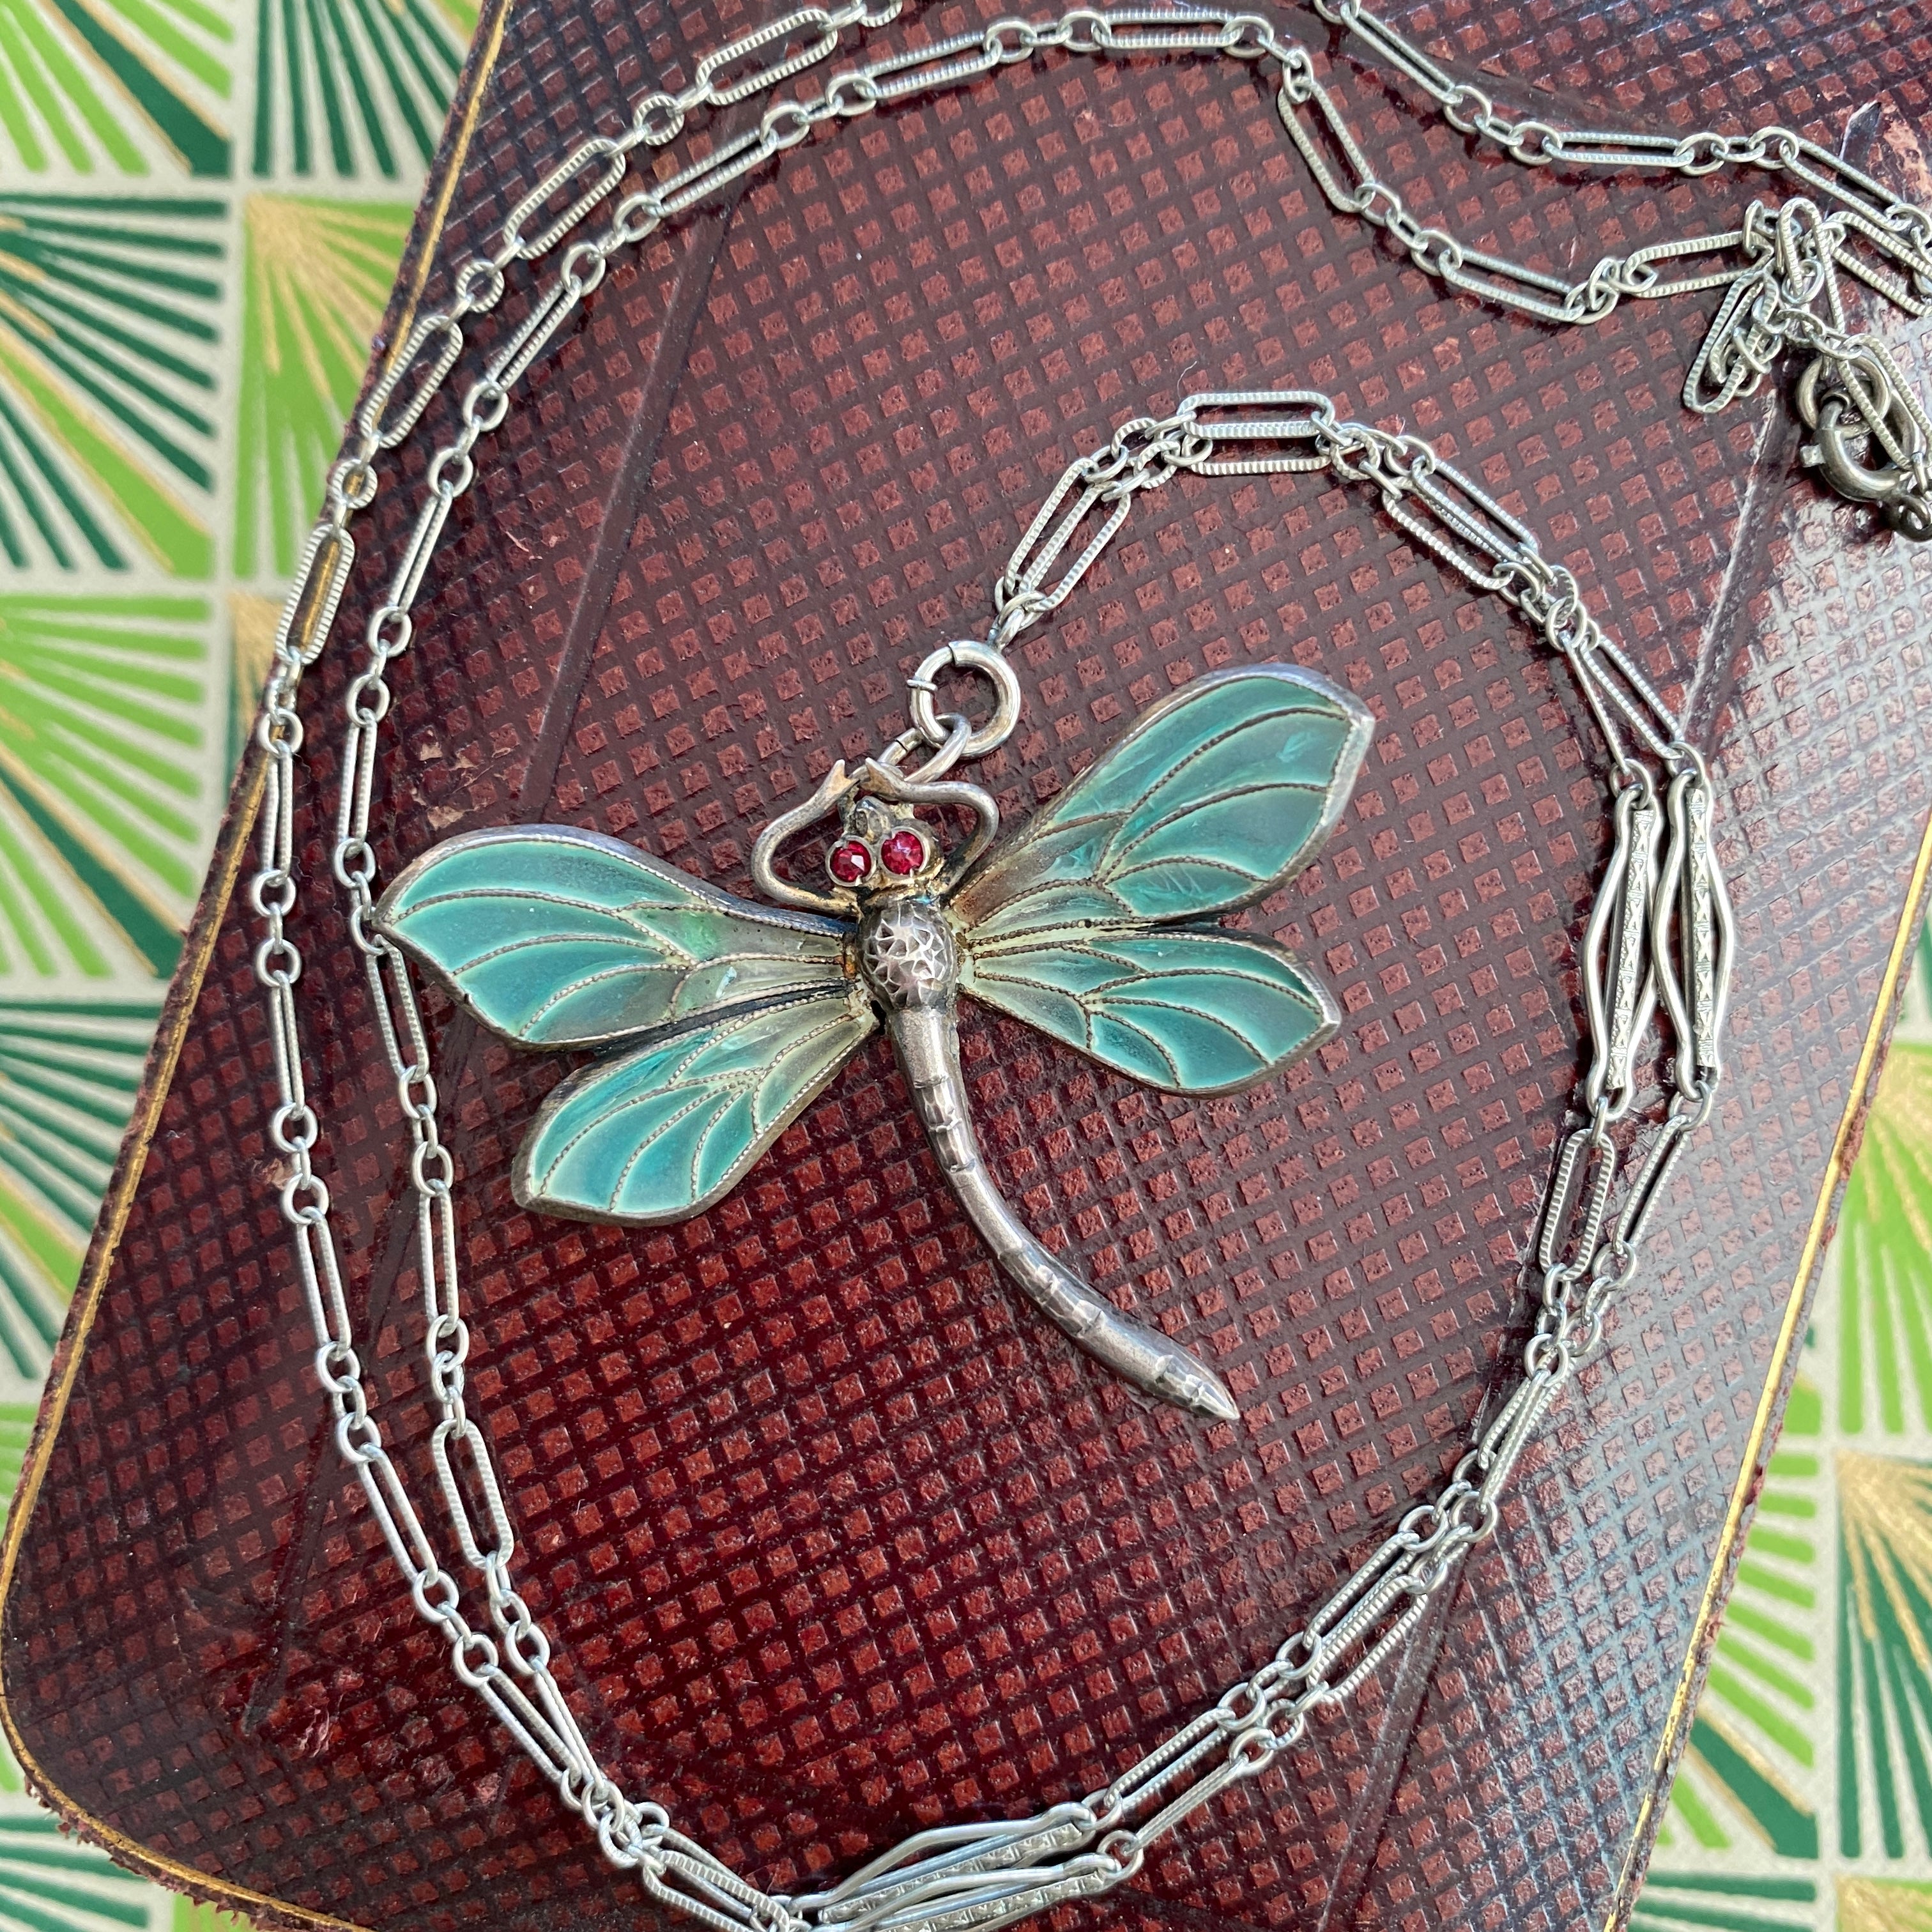 Details:
Plique-a-Jour Art Nouveau dragonfly pendant necklace in sterling silver in beautiful shades of blue and green with little bright red eyes—possibly ruby or maybe paste, not tested. Plique-a-jour is an enamel process from the 15th century